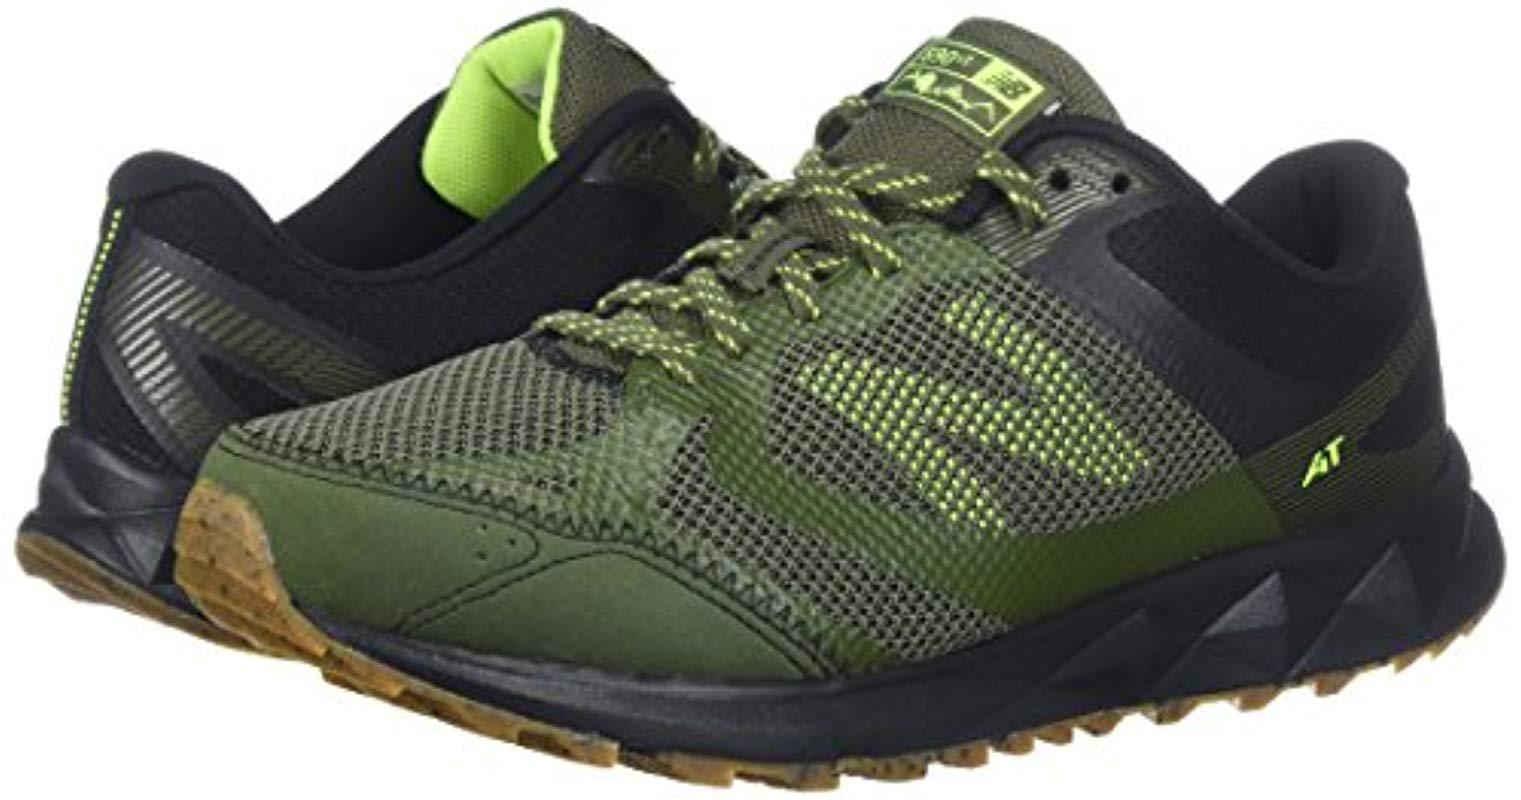 New Balance Synthetic 590v2 Trail Running Shoes in Green/Black ...